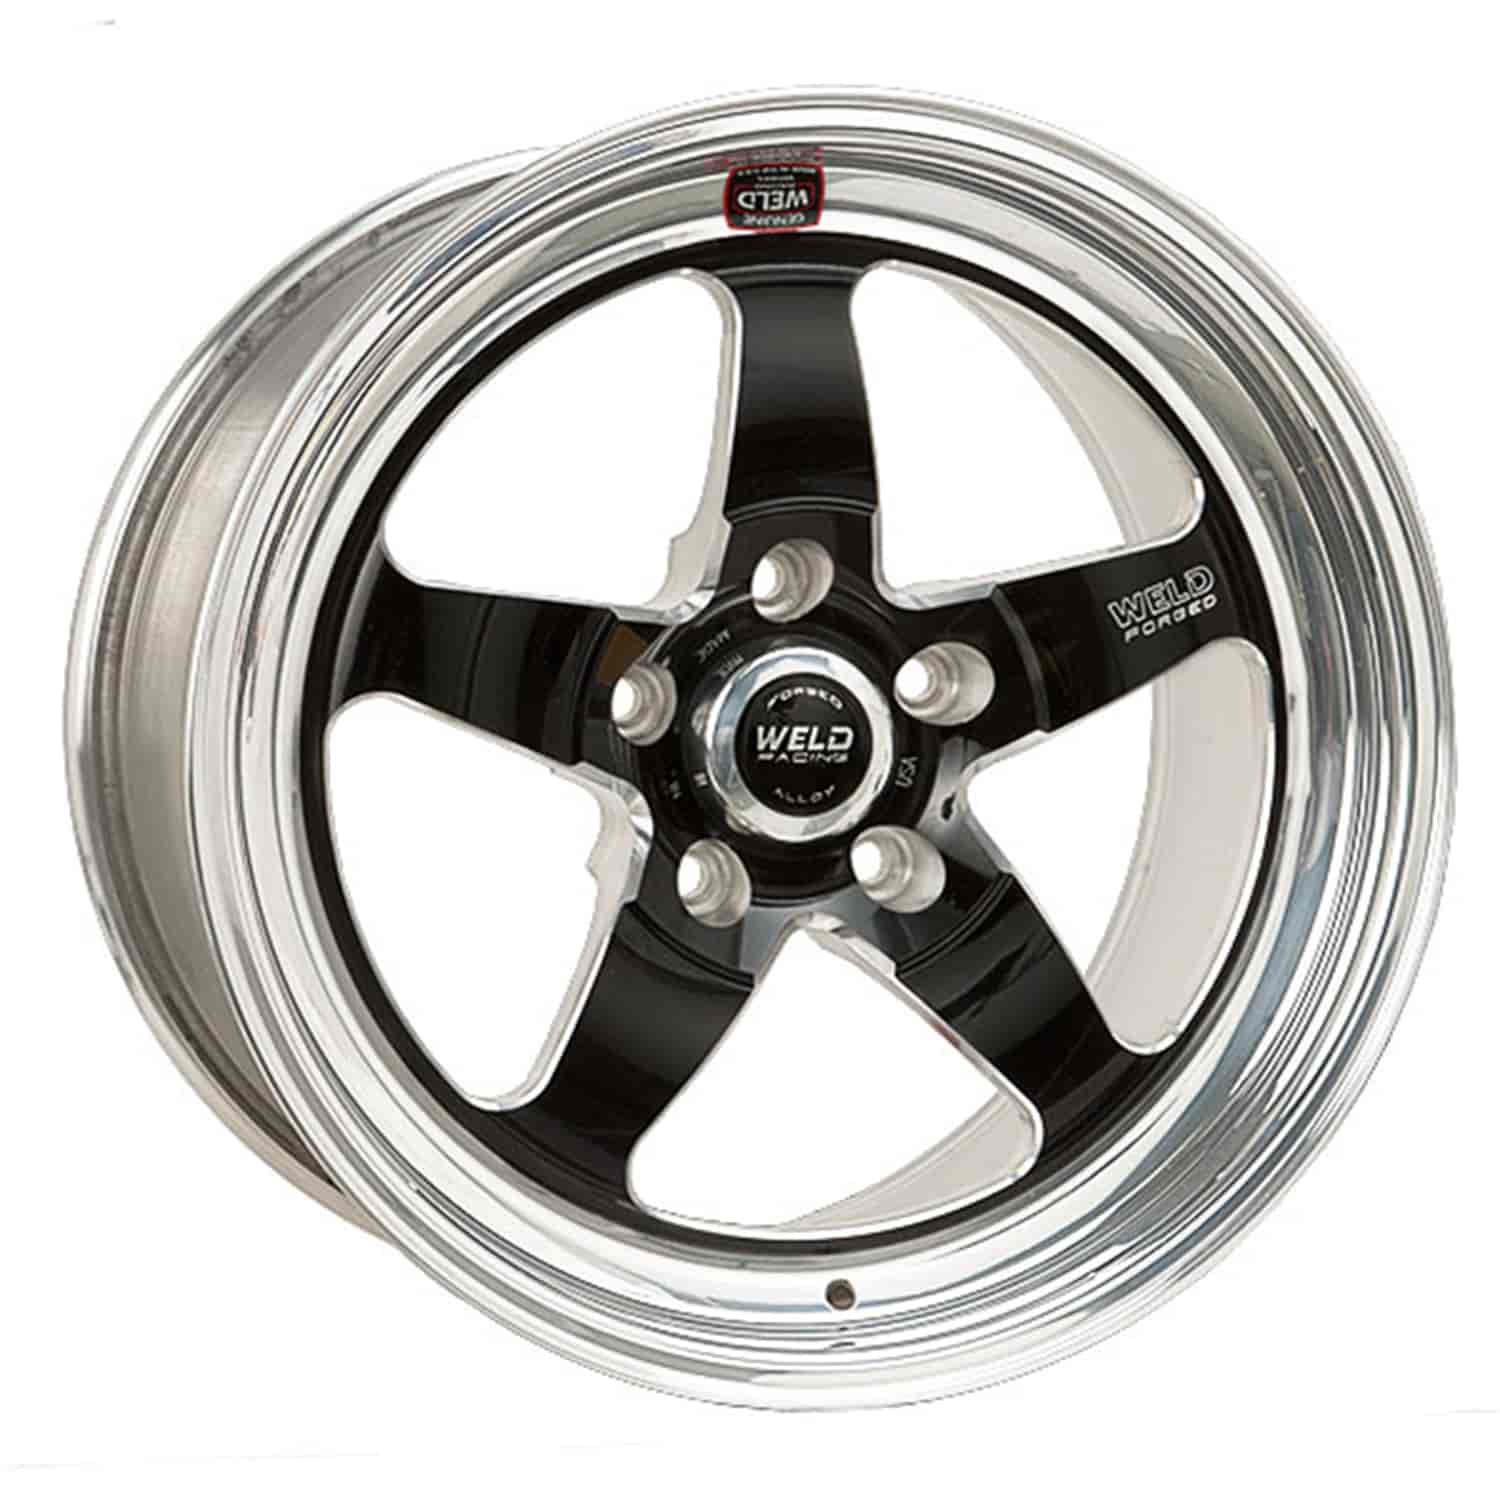 RT-S Series Wheel Size: 15" x 4" Bolt Circle: 5 x 4-3/4" Back Space: 1-1/2"